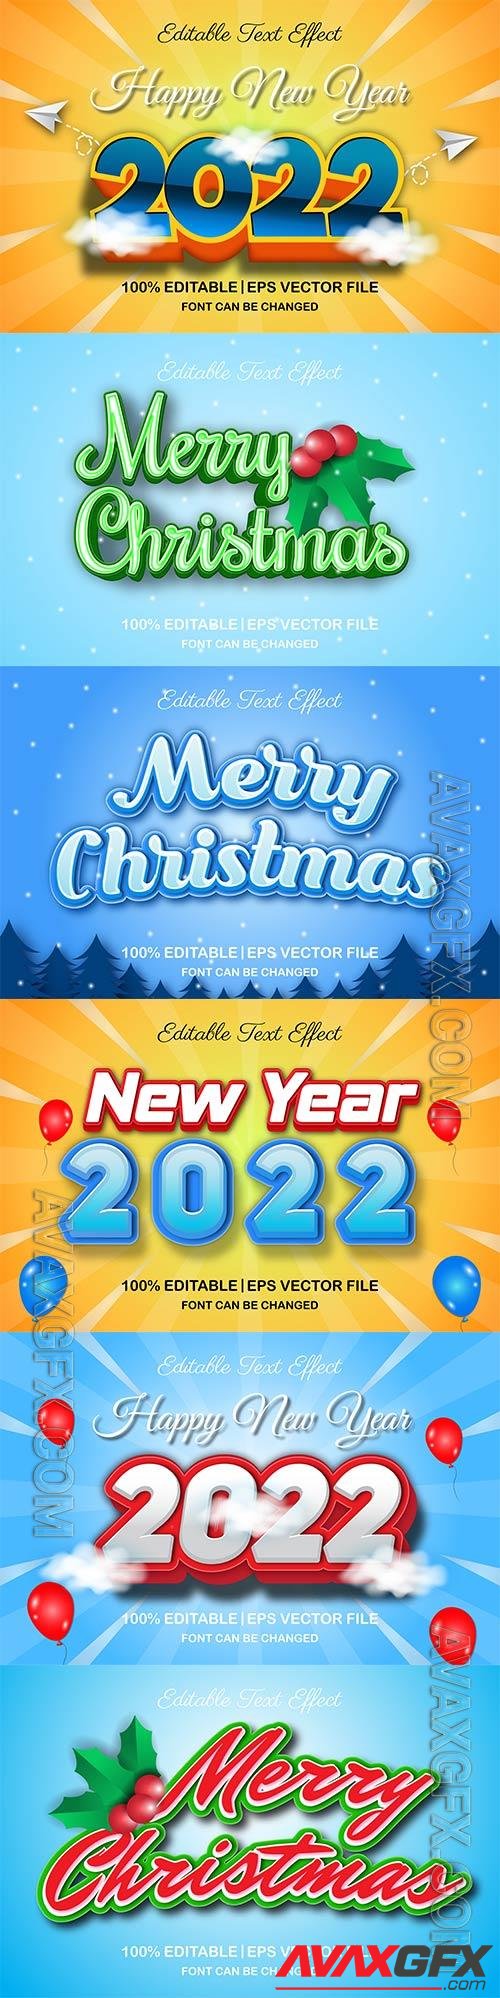 Merry christmas and happy new year 2022 editable vector text effects vol 9